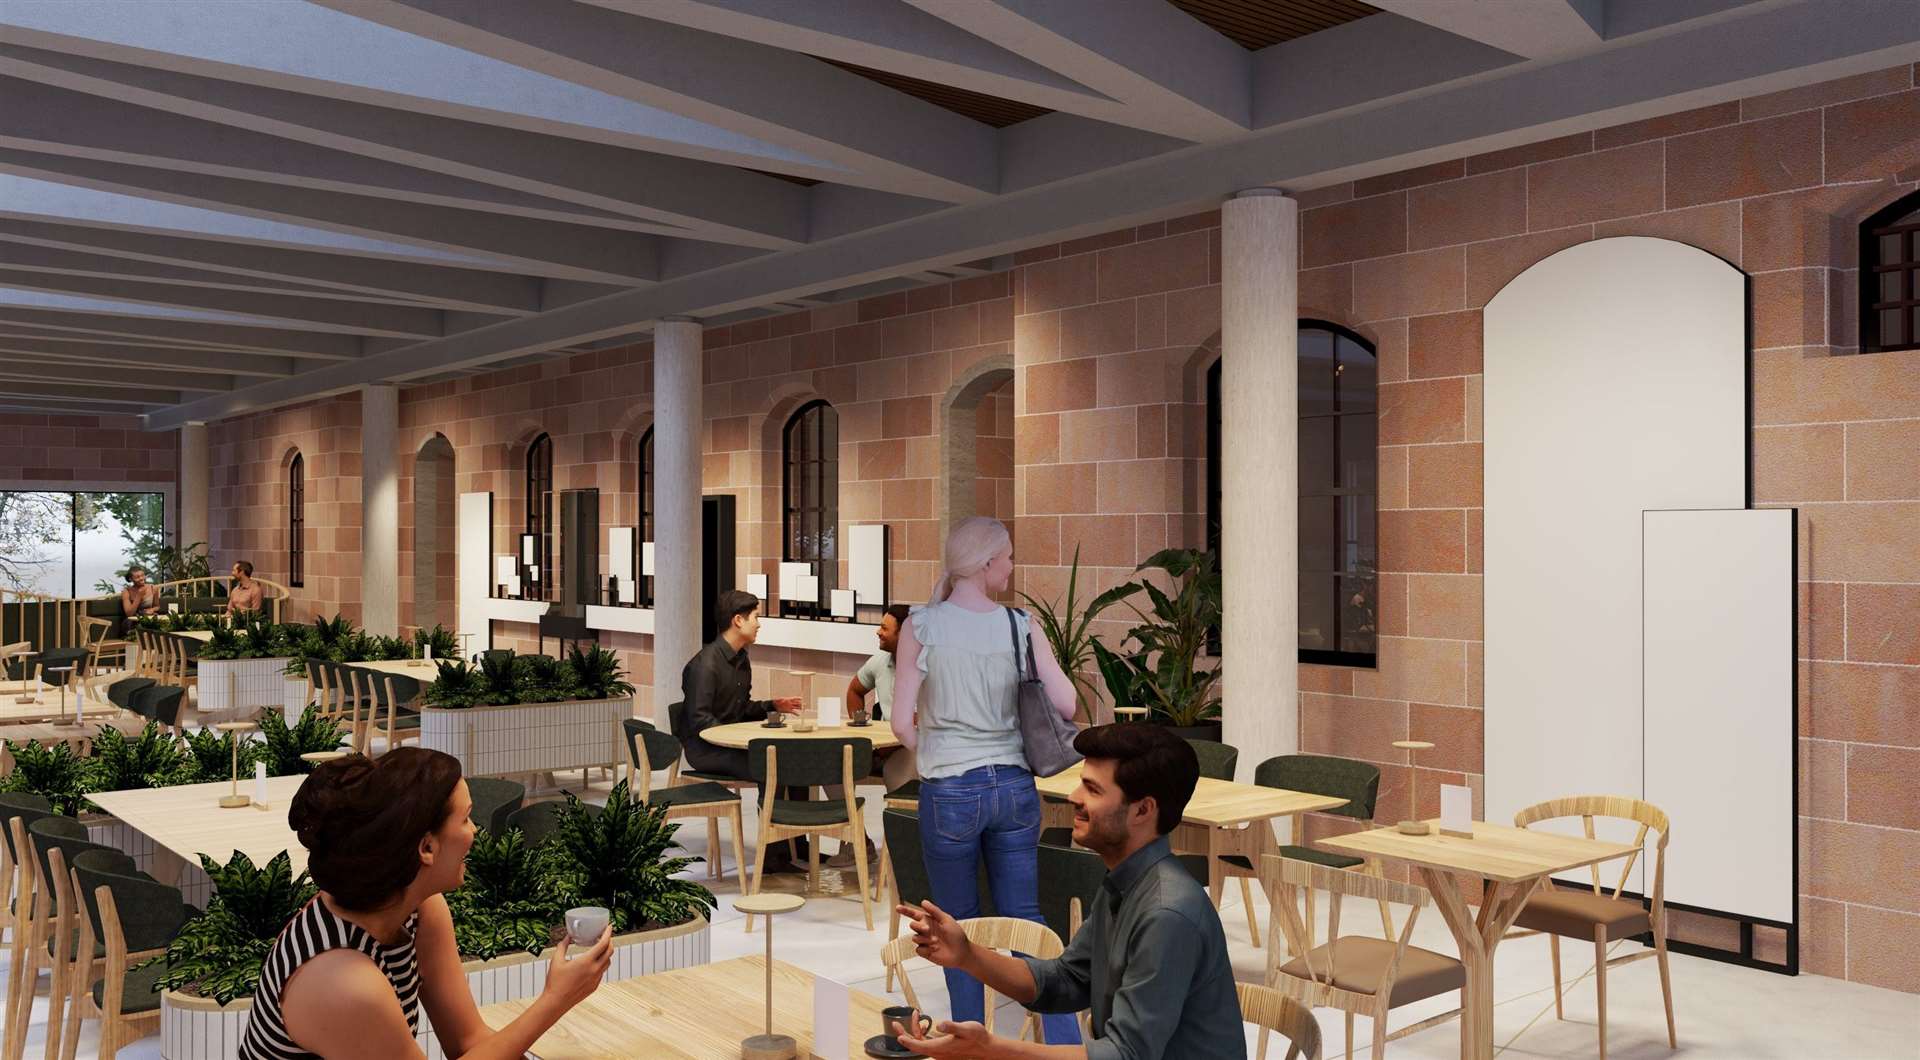 An artist's impression of the restaurant area in the new link building at the castle.